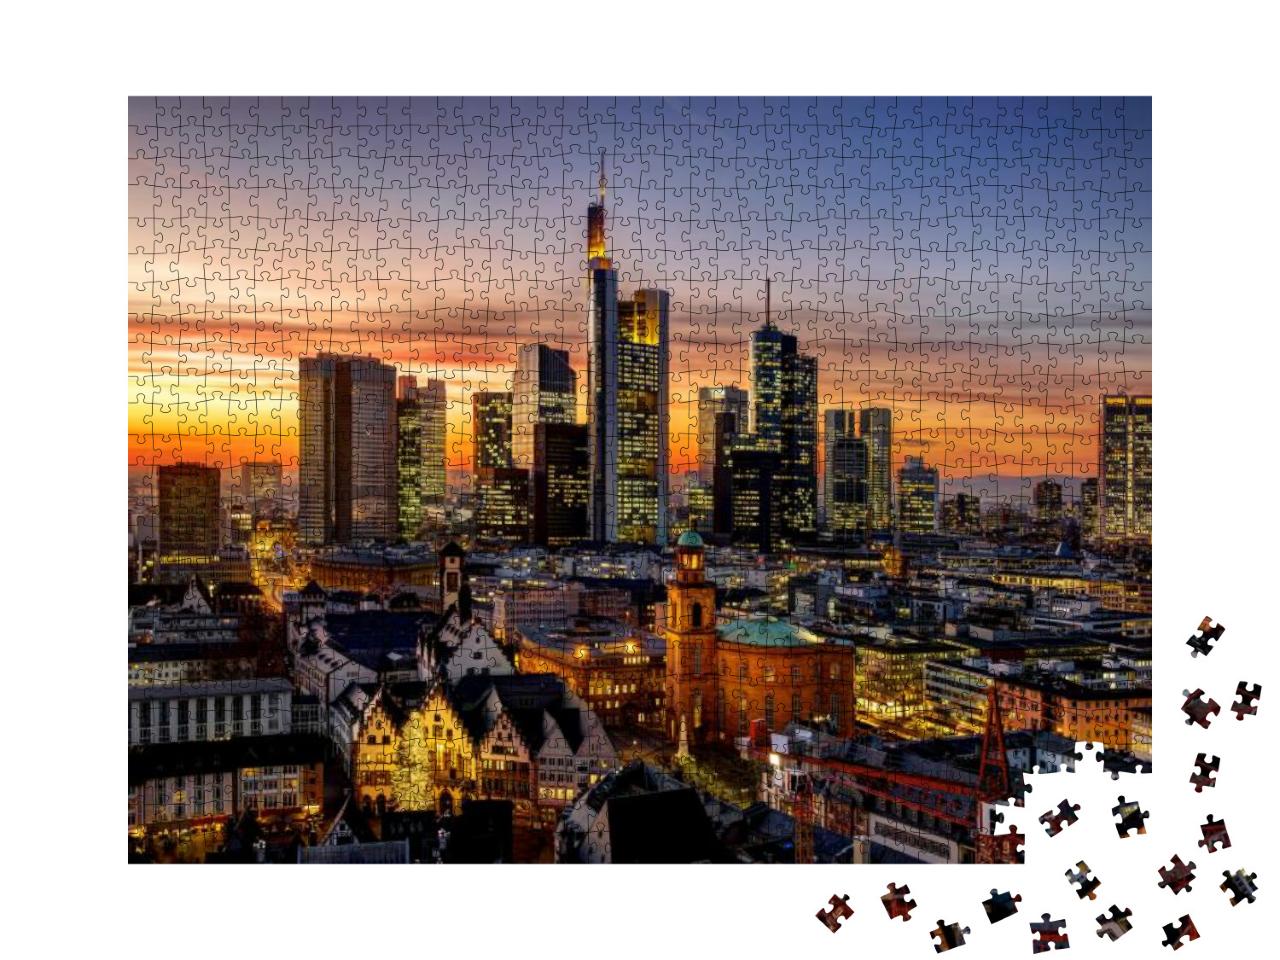 Frankfurt Am Main At Night, Germany... Jigsaw Puzzle with 1000 pieces